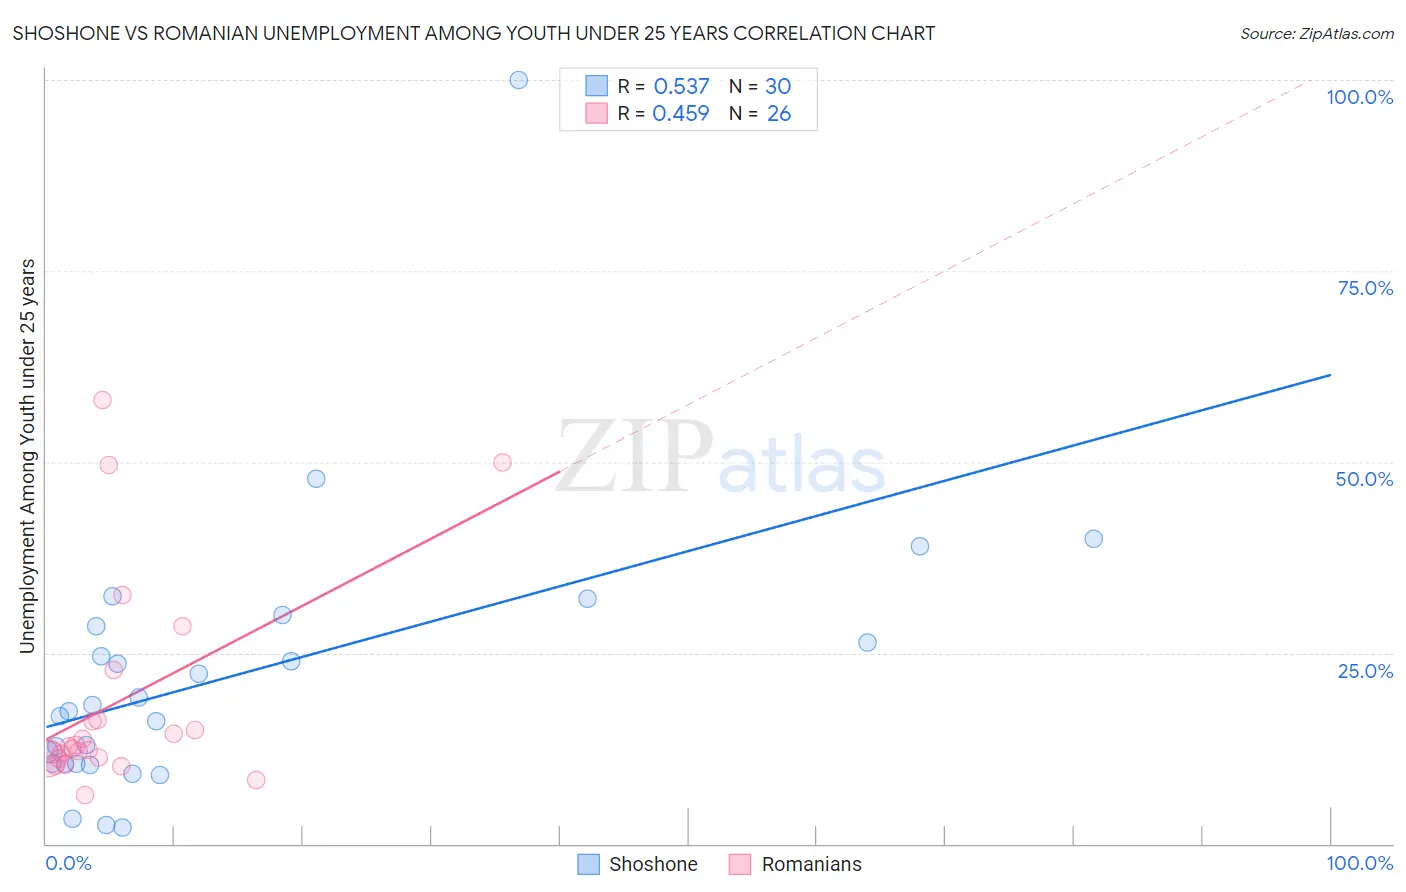 Shoshone vs Romanian Unemployment Among Youth under 25 years